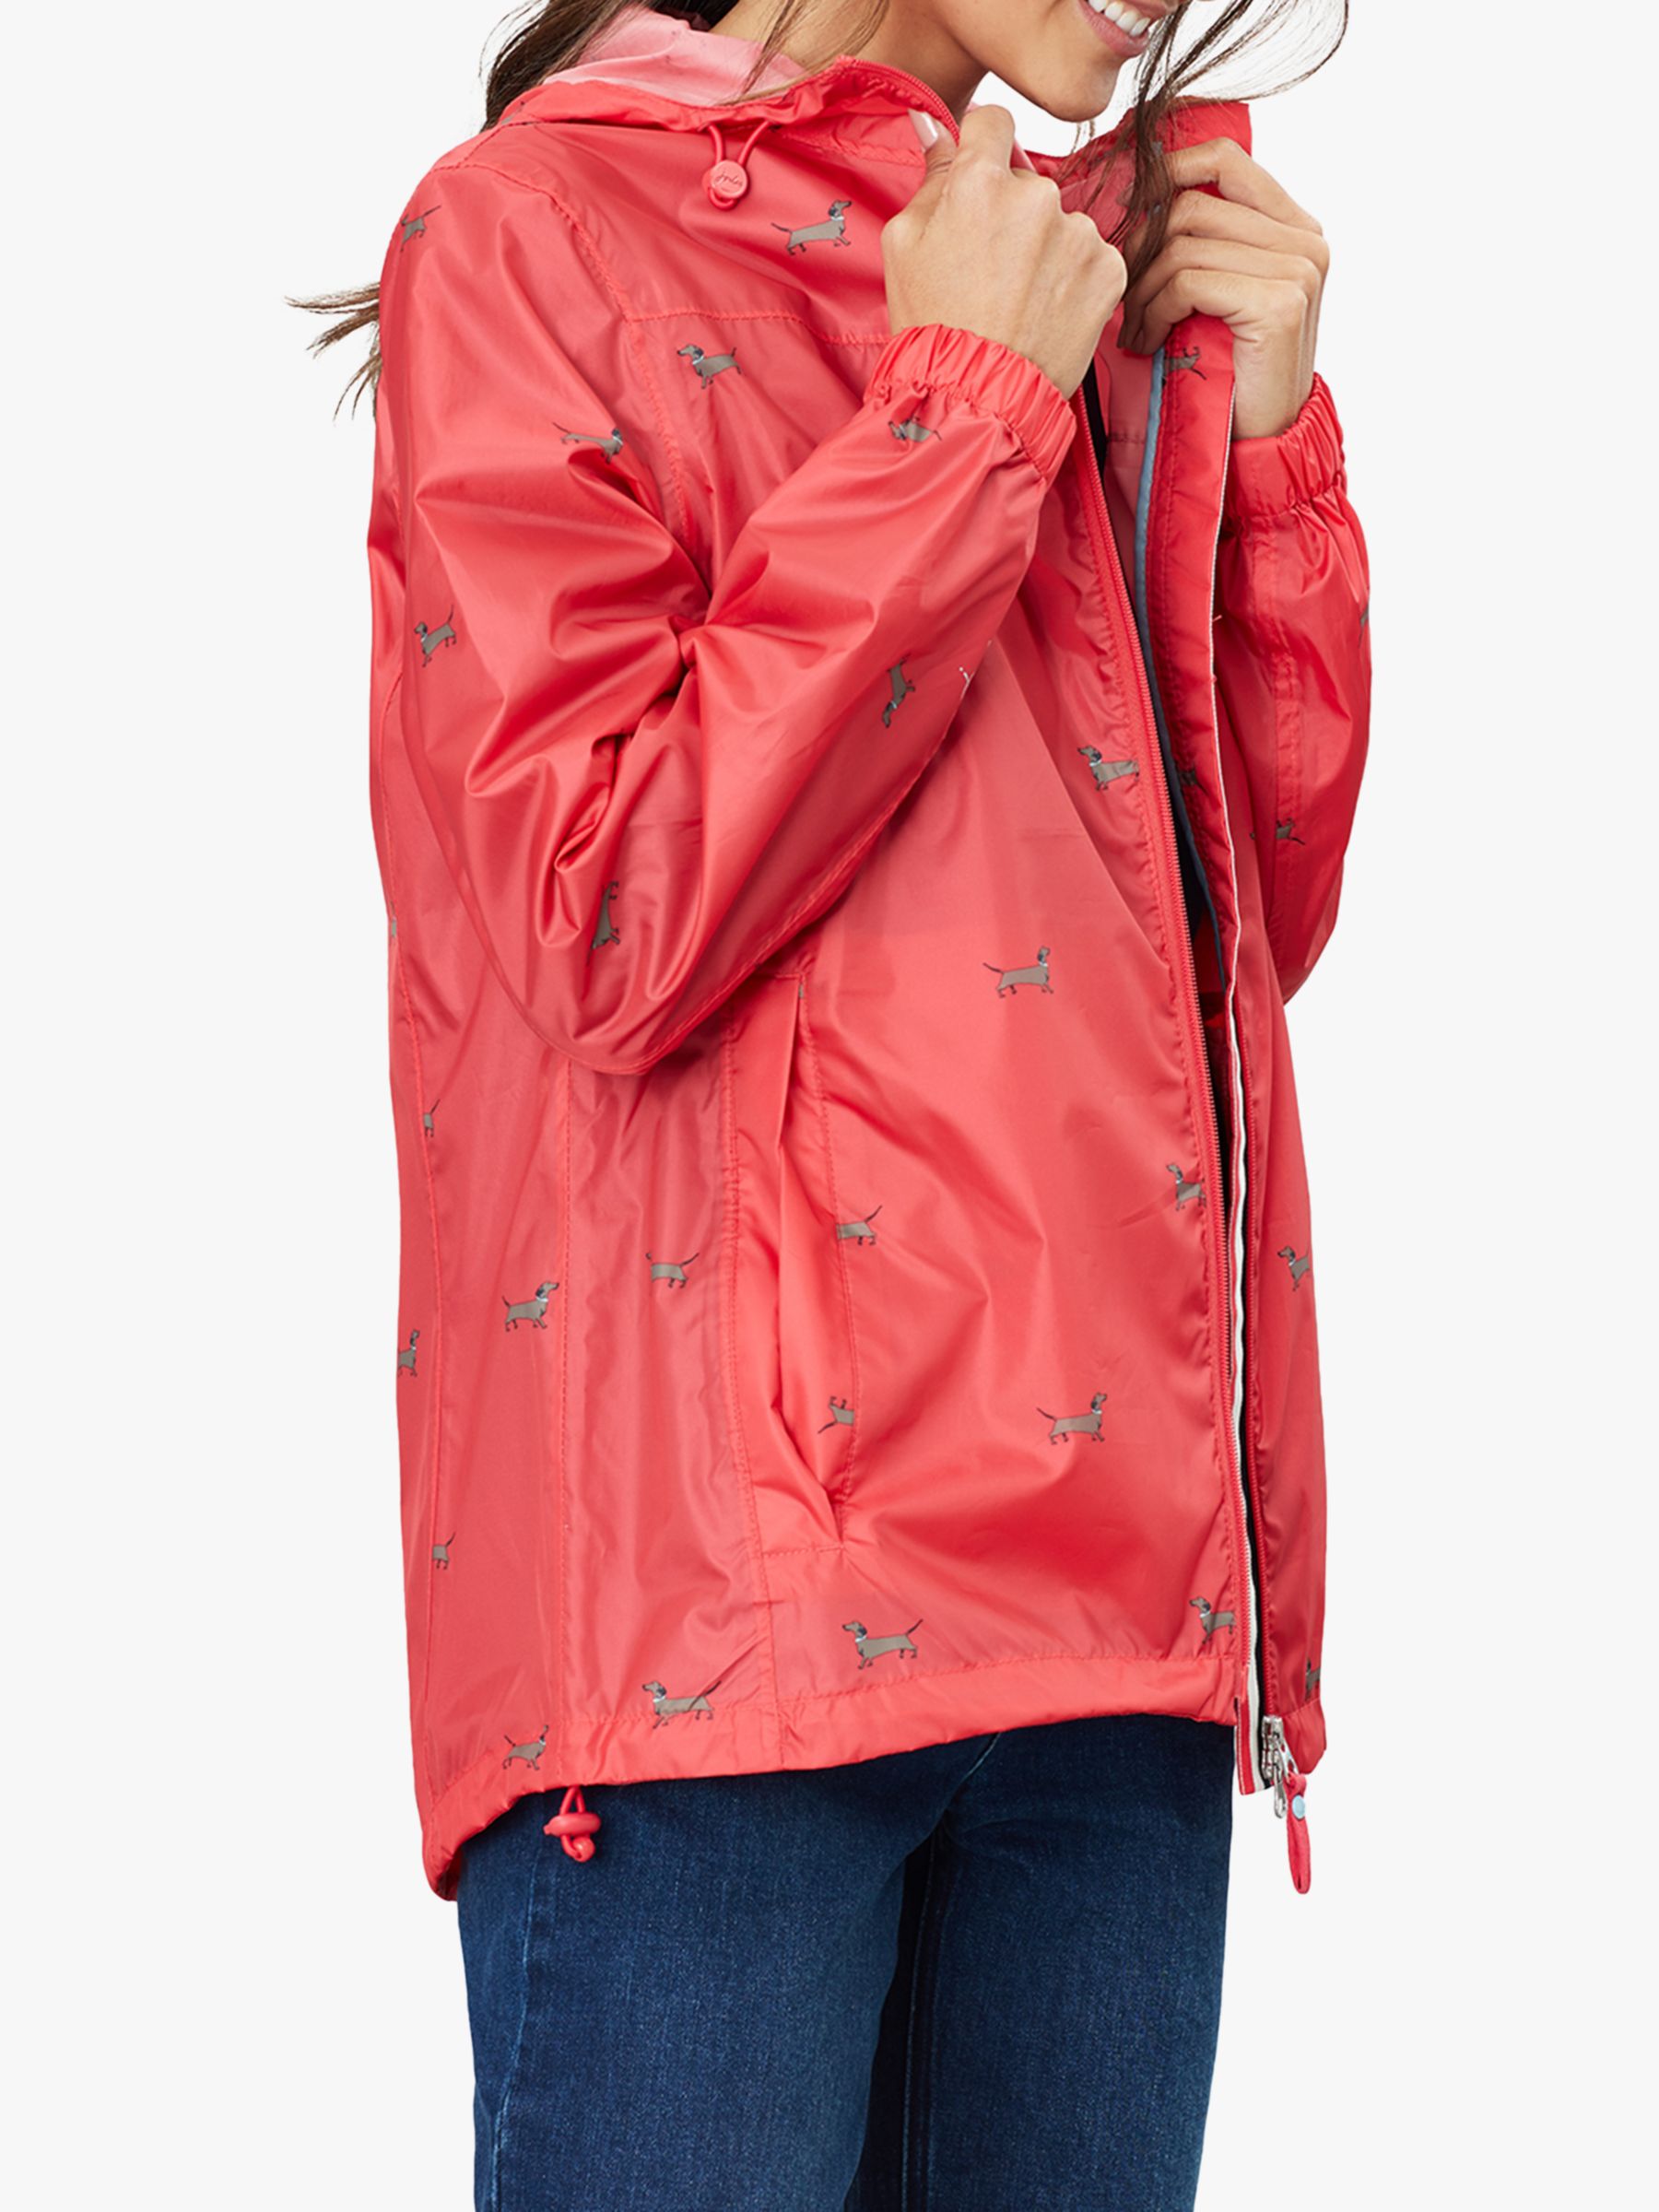 Joules Meadley Pack Away Jacket, Red Dog